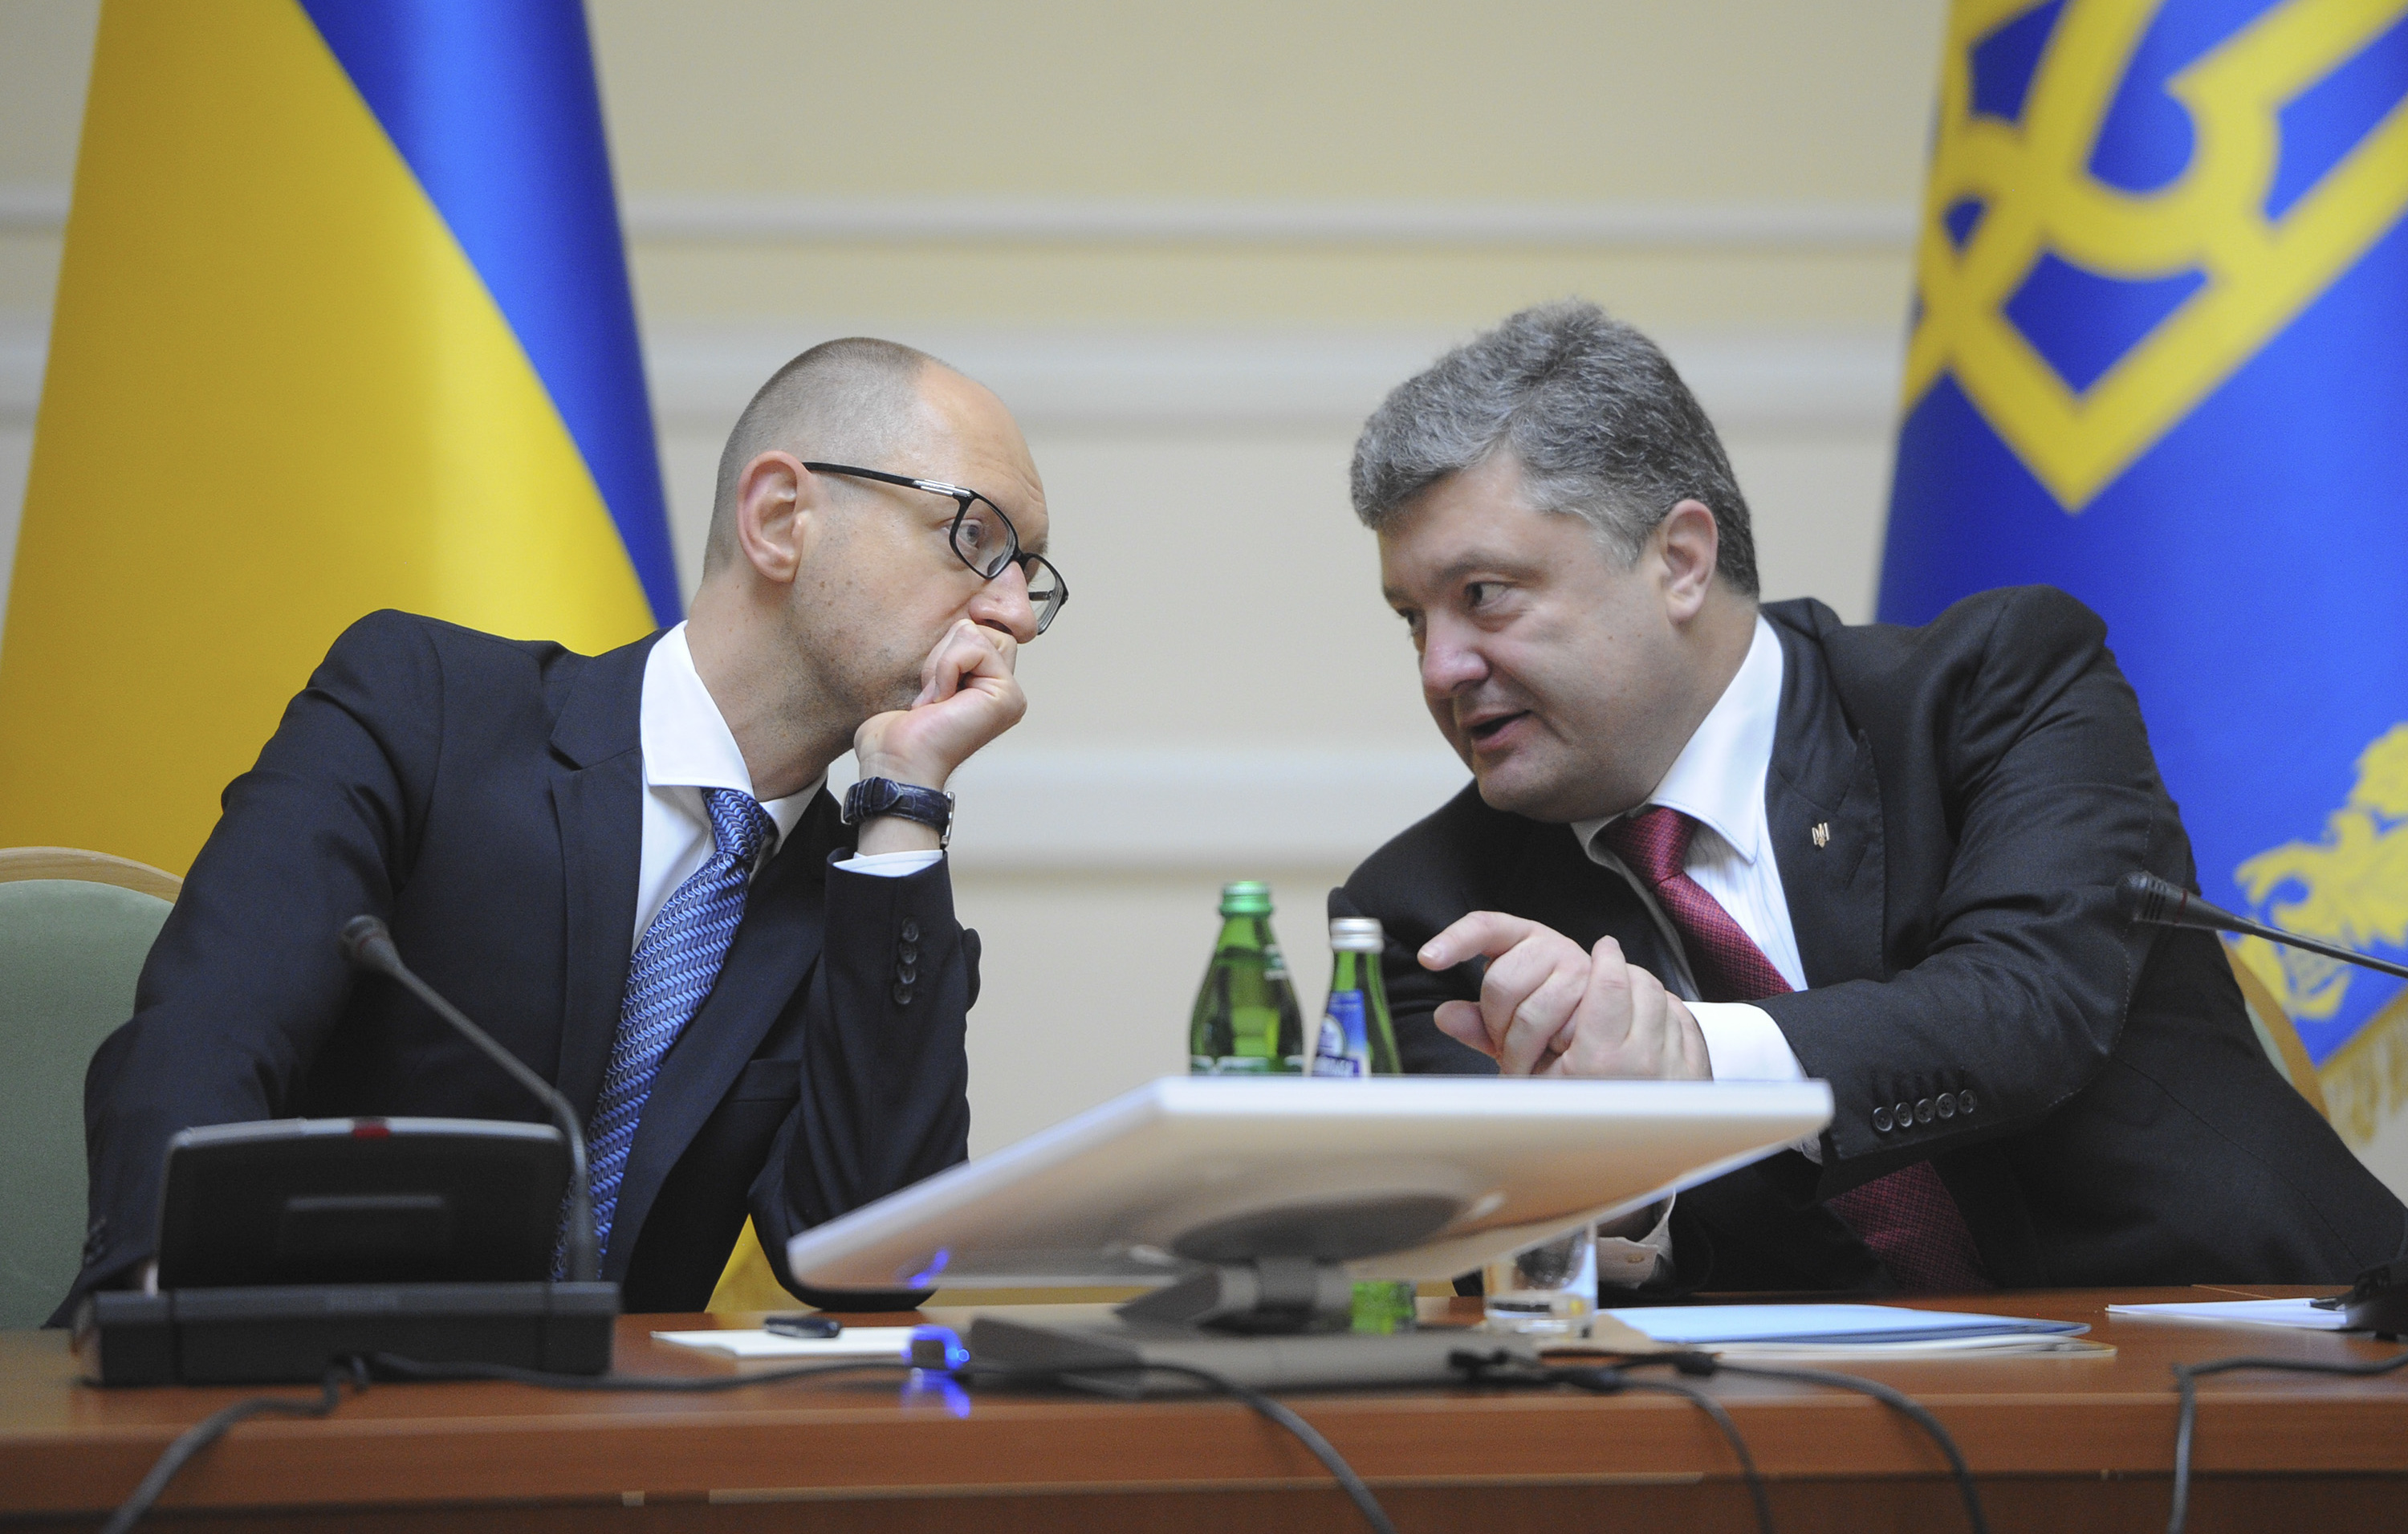 Ukrainian President Petro Poroshenko, right, talks with Prime Minister Arseniy Yatsenyuk in Kiev, Ukraine,  on Sept. 10, 2014. Poroshenko promised on that day to introduce to parliament as early as next week a bill that would offer greater autonomy to rebellious regions in the pro-Russia eastern regions, where separatists have been battling government troops for almost five months (Andrew Kravchenko—AP)